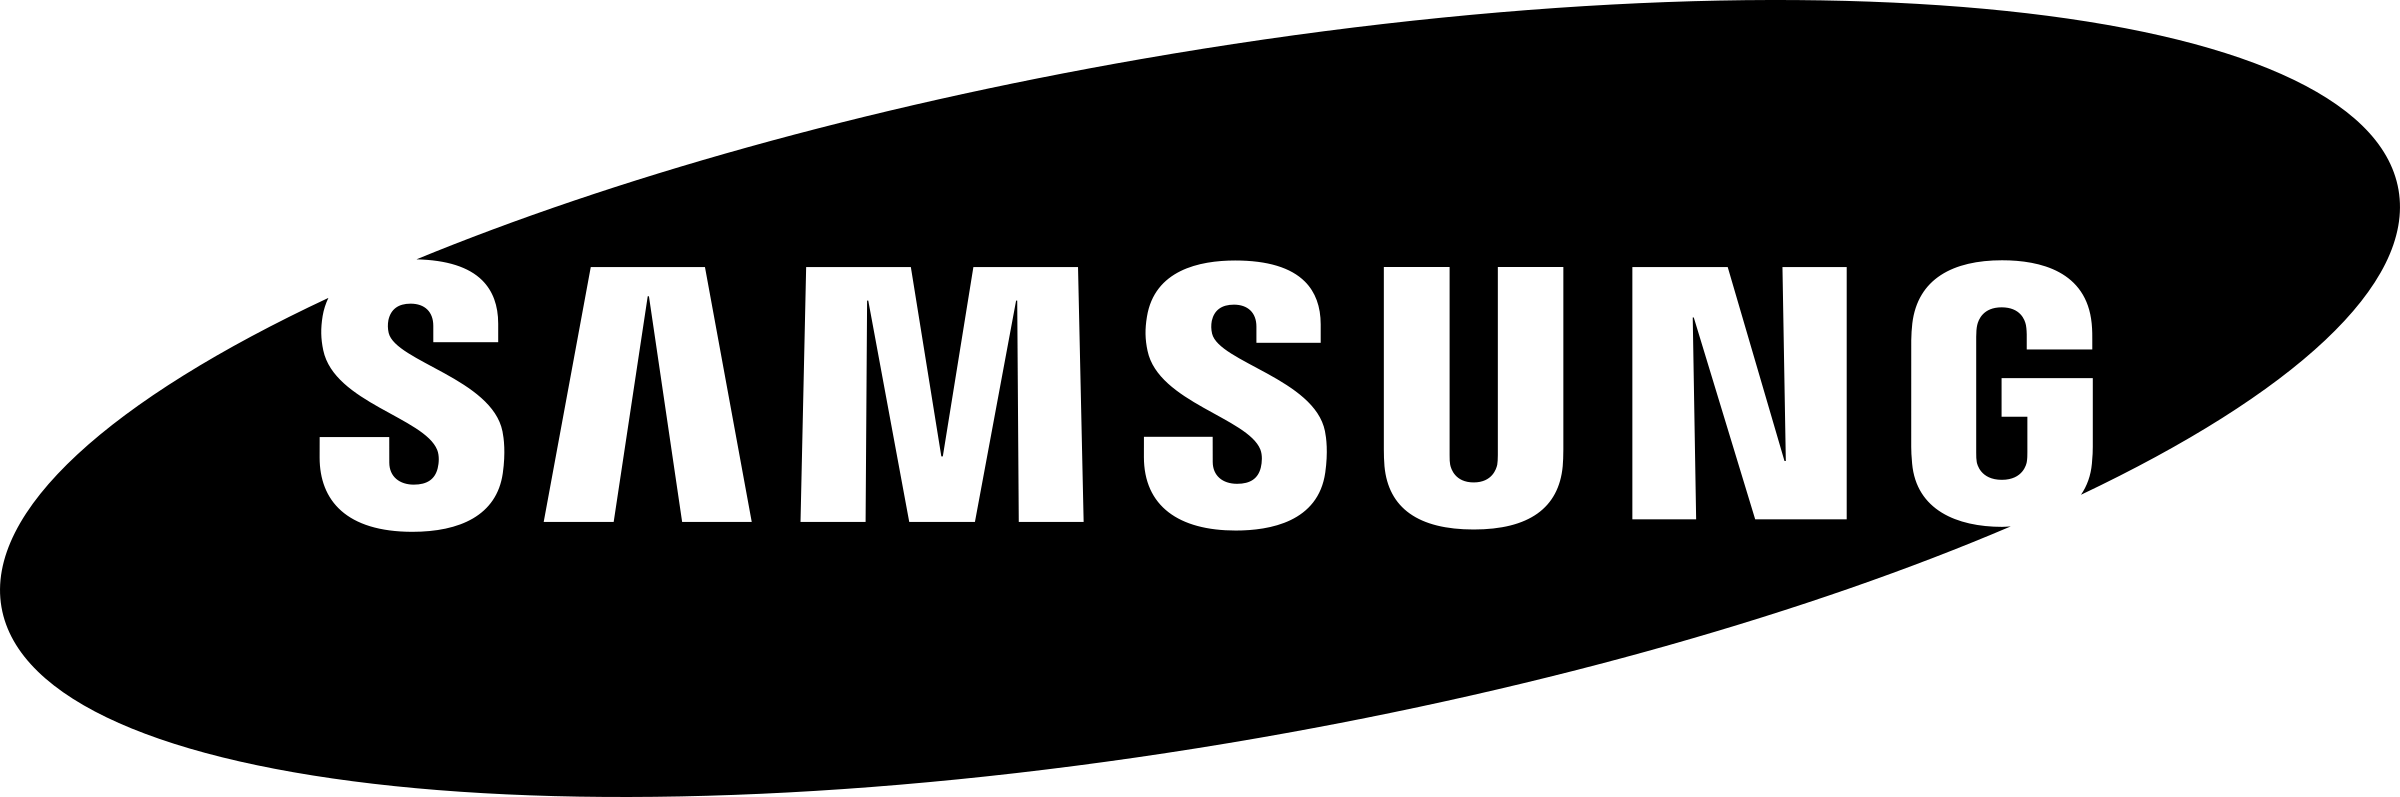 samsung-black-and-white-logo.png